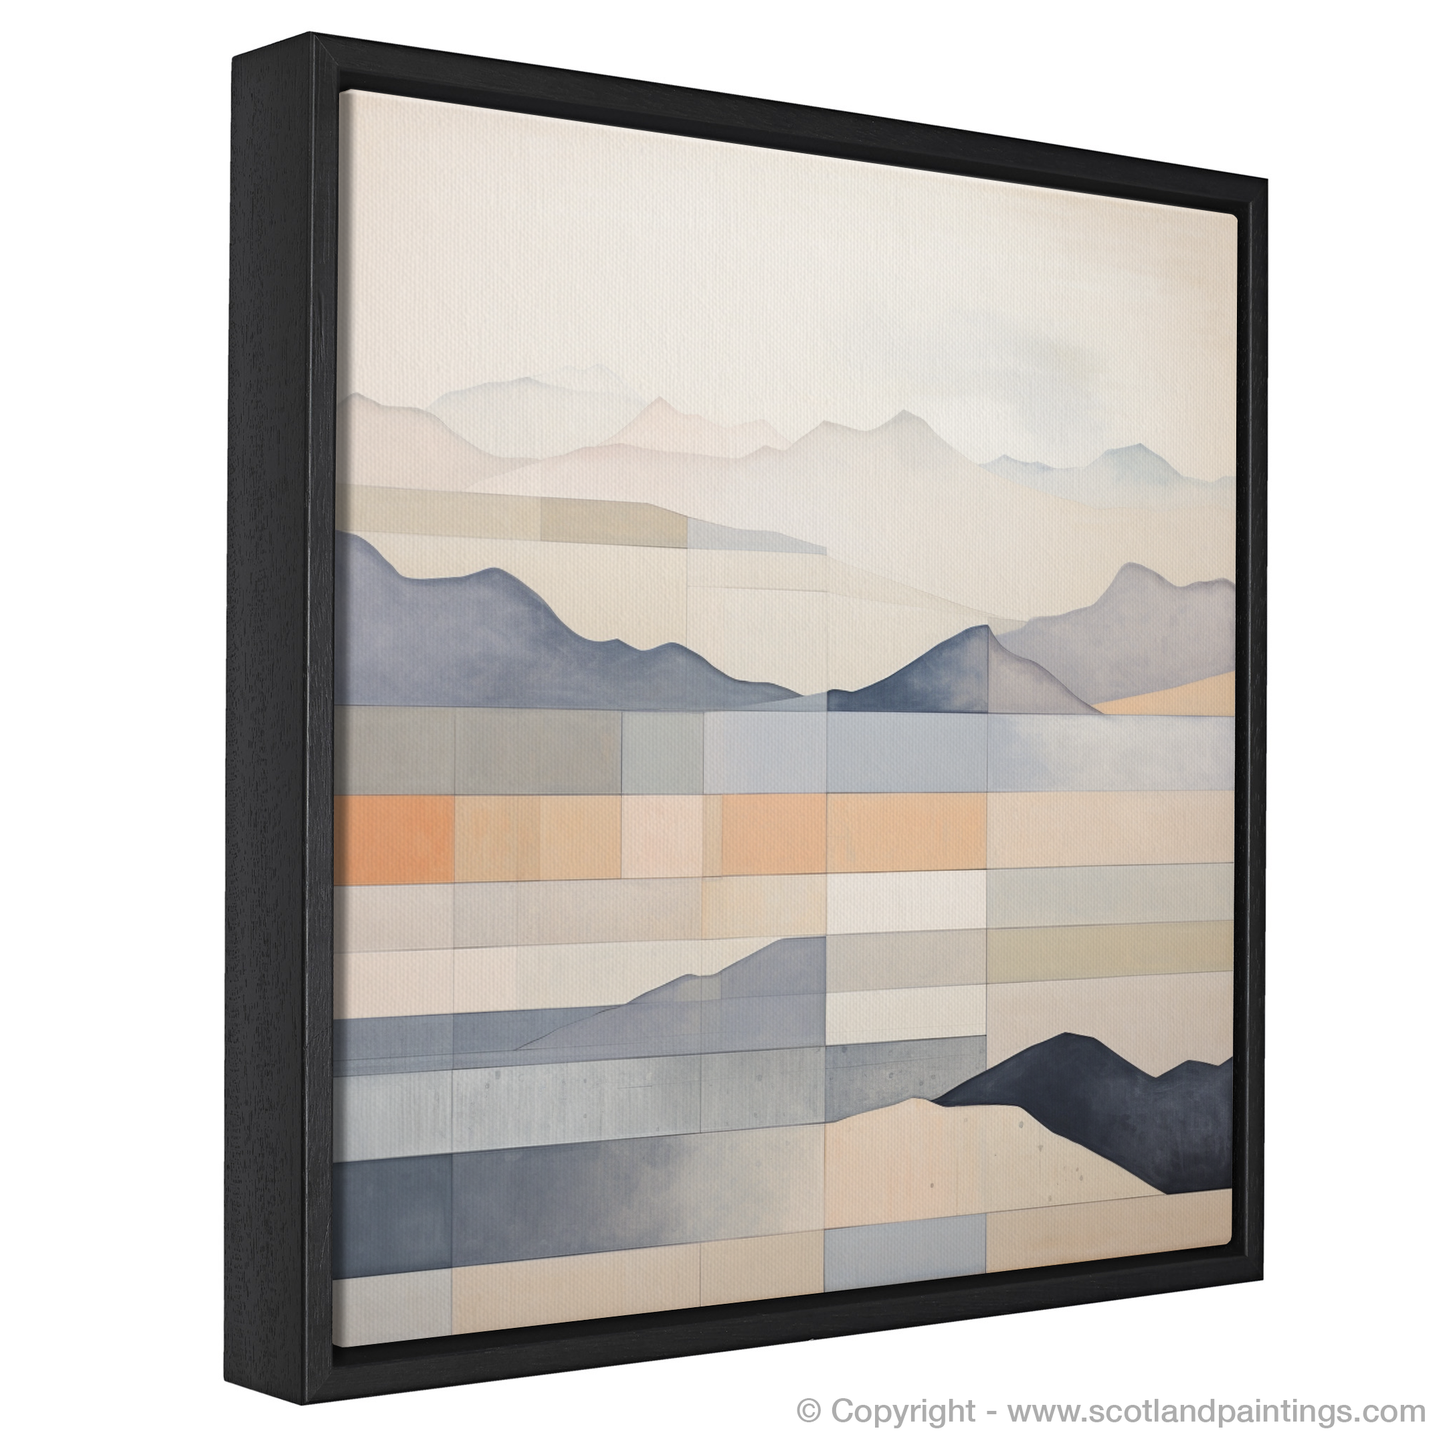 Painting and Art Print of Creag Mhòr (Meall na Aighean) entitled "Abstract Essence of Creag Mhòr".